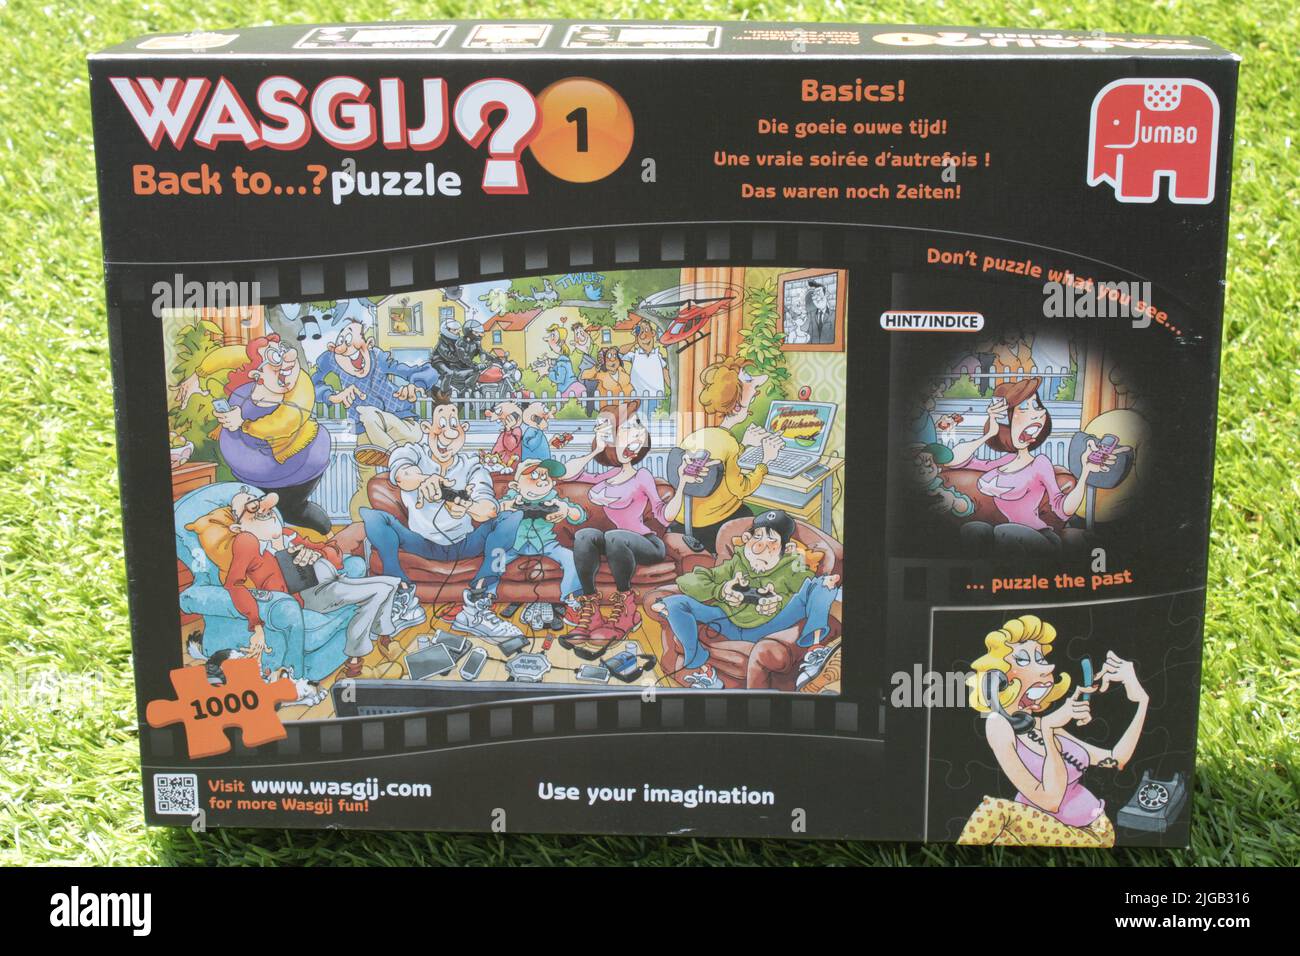 Wasgij Back to Puzzle.  1000 piece unique jigsaw puzzle brand where you need to use your imagination to piece together the Wasgij solution. 09-07-2022 Stock Photo